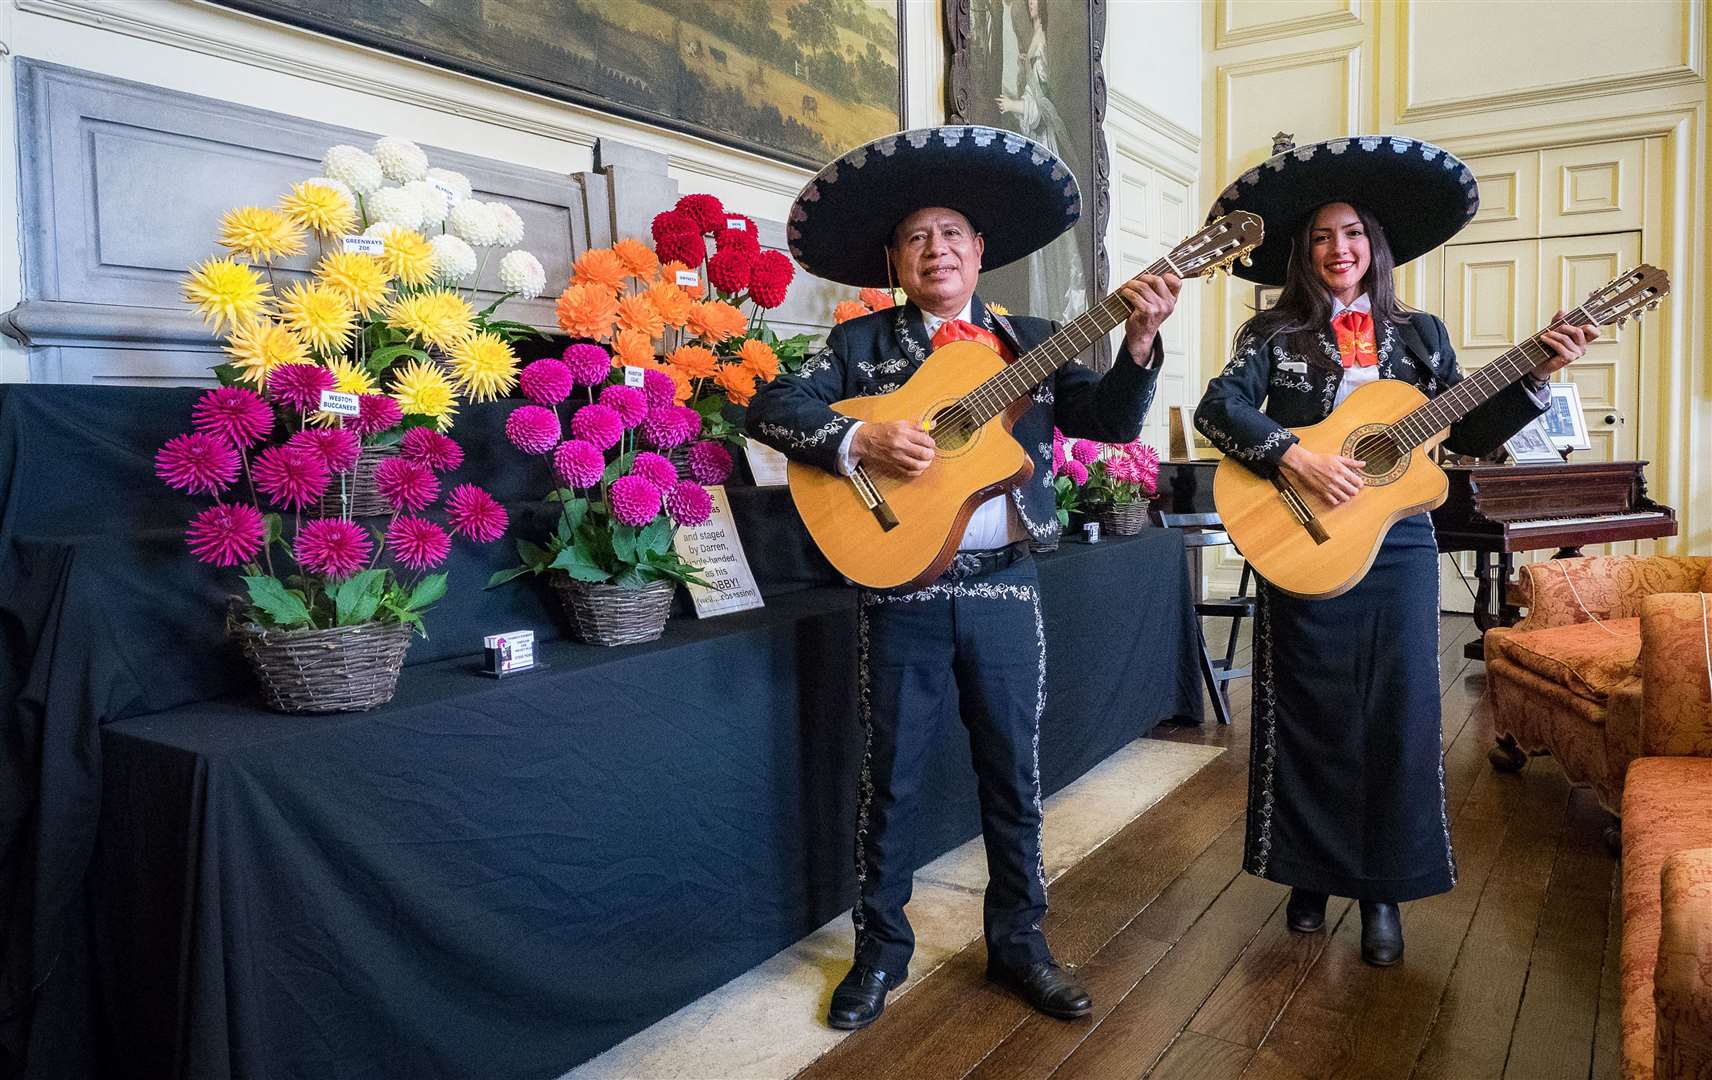 There'll be a Mariachi band at the Mexican Weekend at Lullingstone Castle